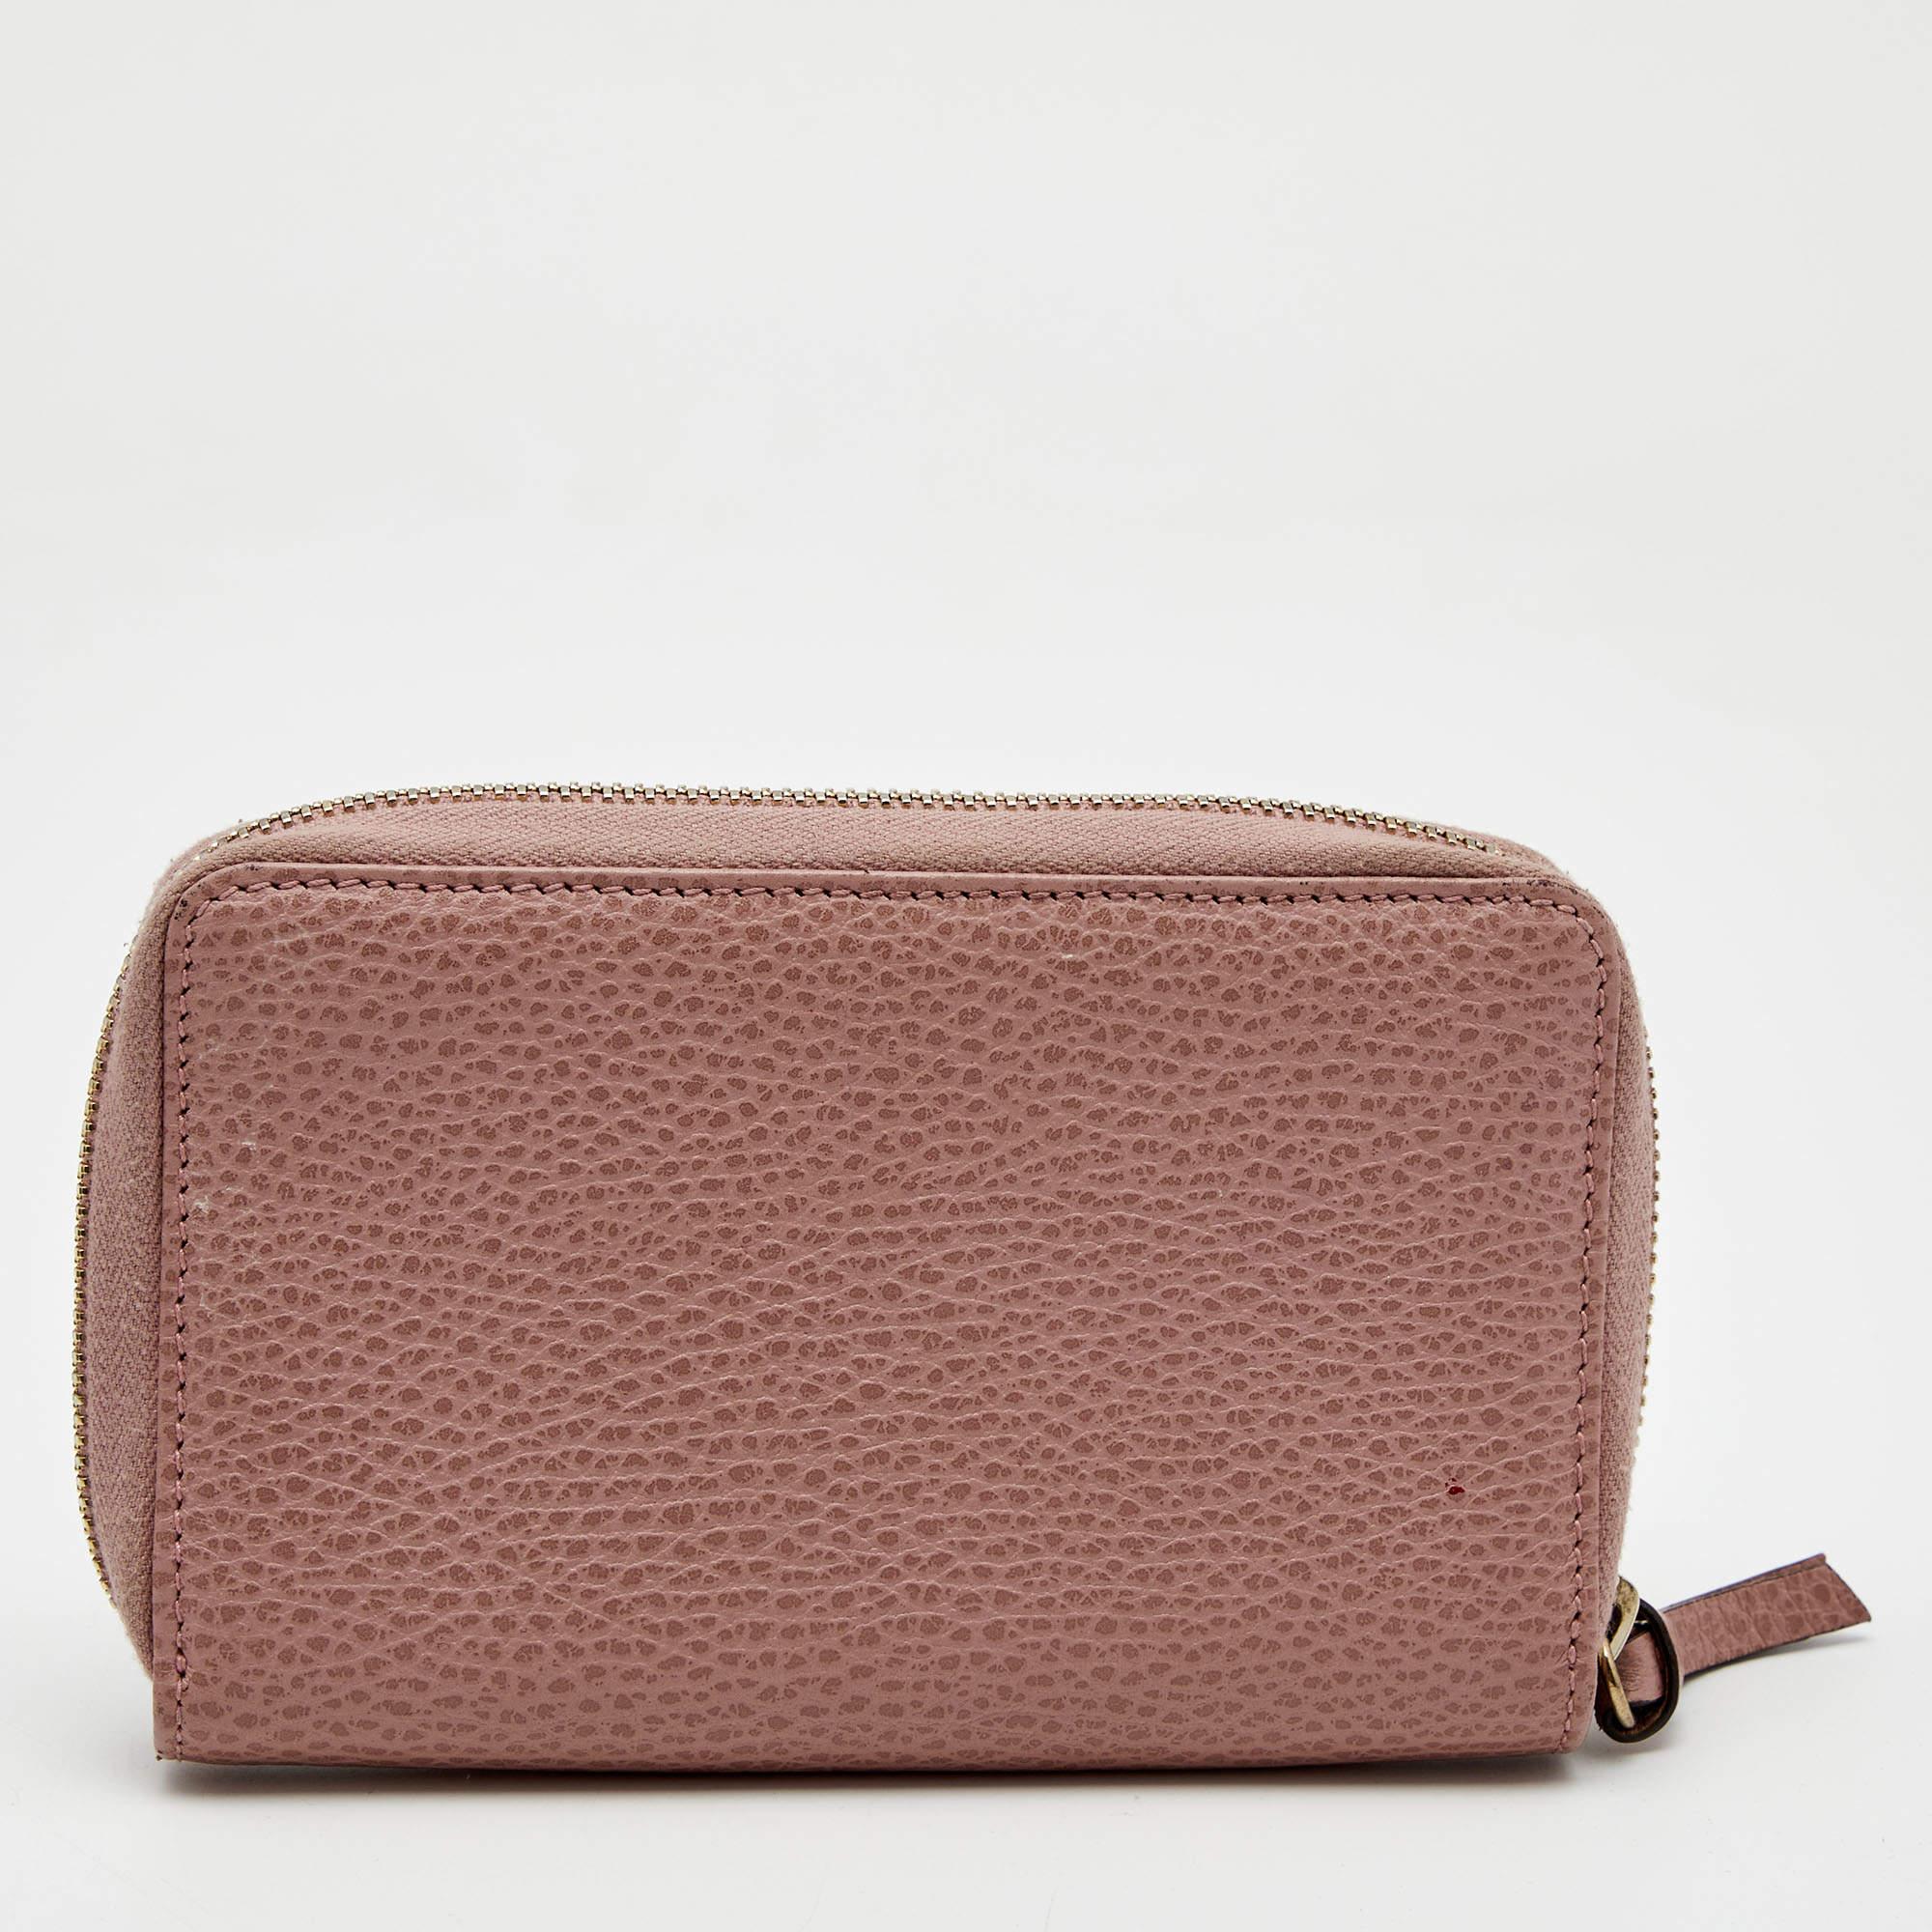 Make this functional wallet from Gucci your go-to accessory this season. Created with pink leather on the exterior, this wallet will lend a luxe appearance to your ensemble. The zip-around closure opens to a well-sized interior that accommodates all